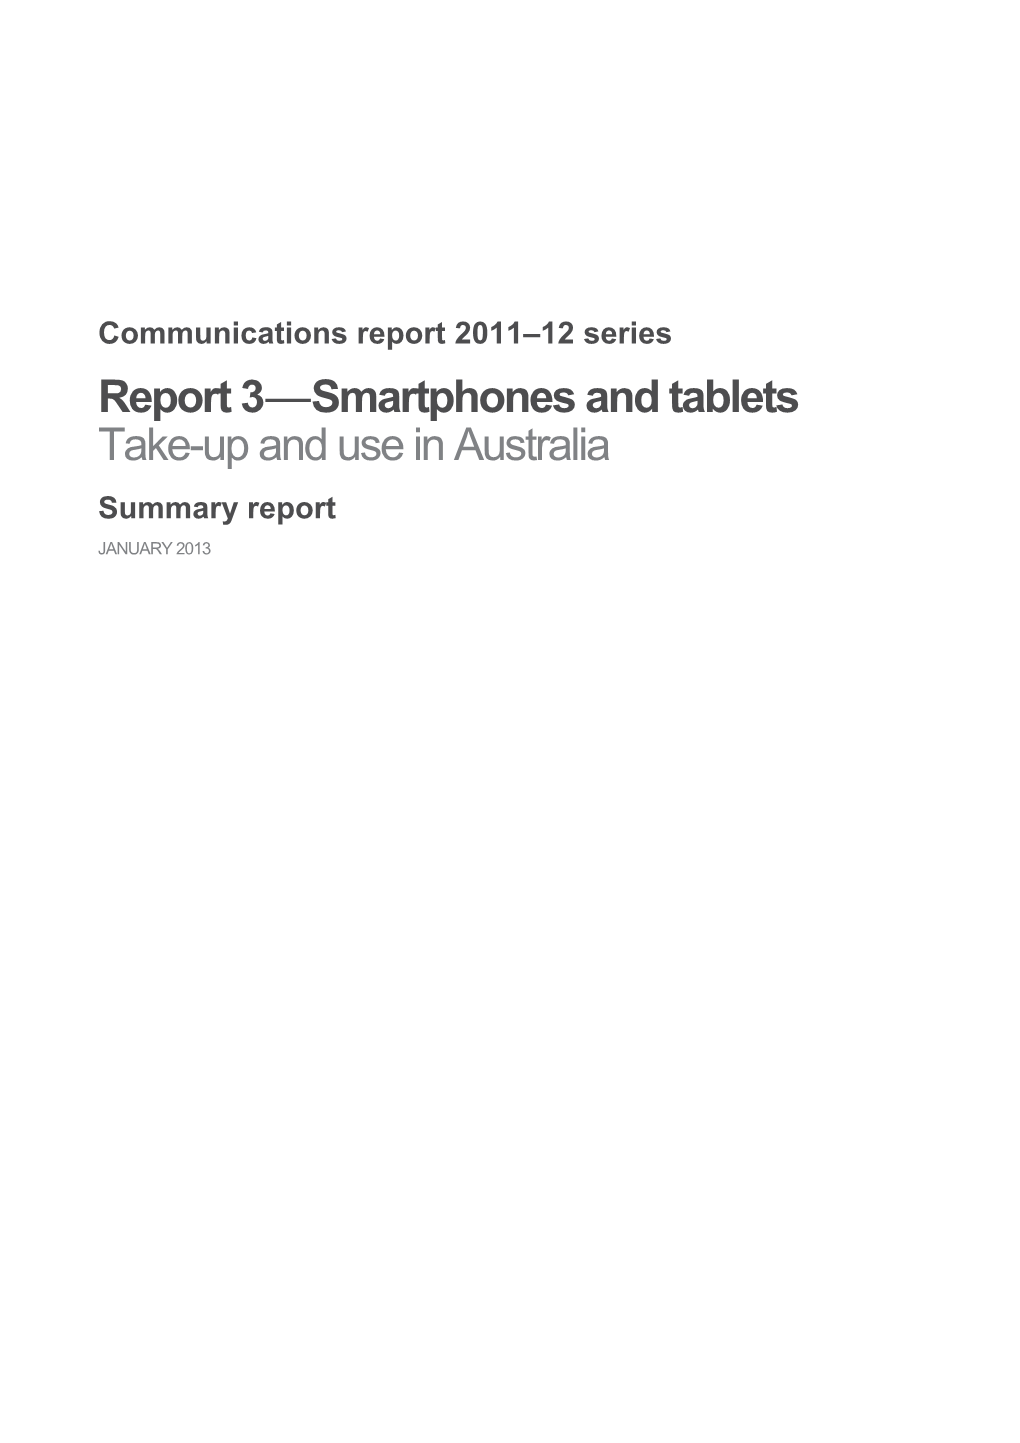 Report 3 Smartphones and Tablets Summary Report (Comms Report 2011-12 Series)